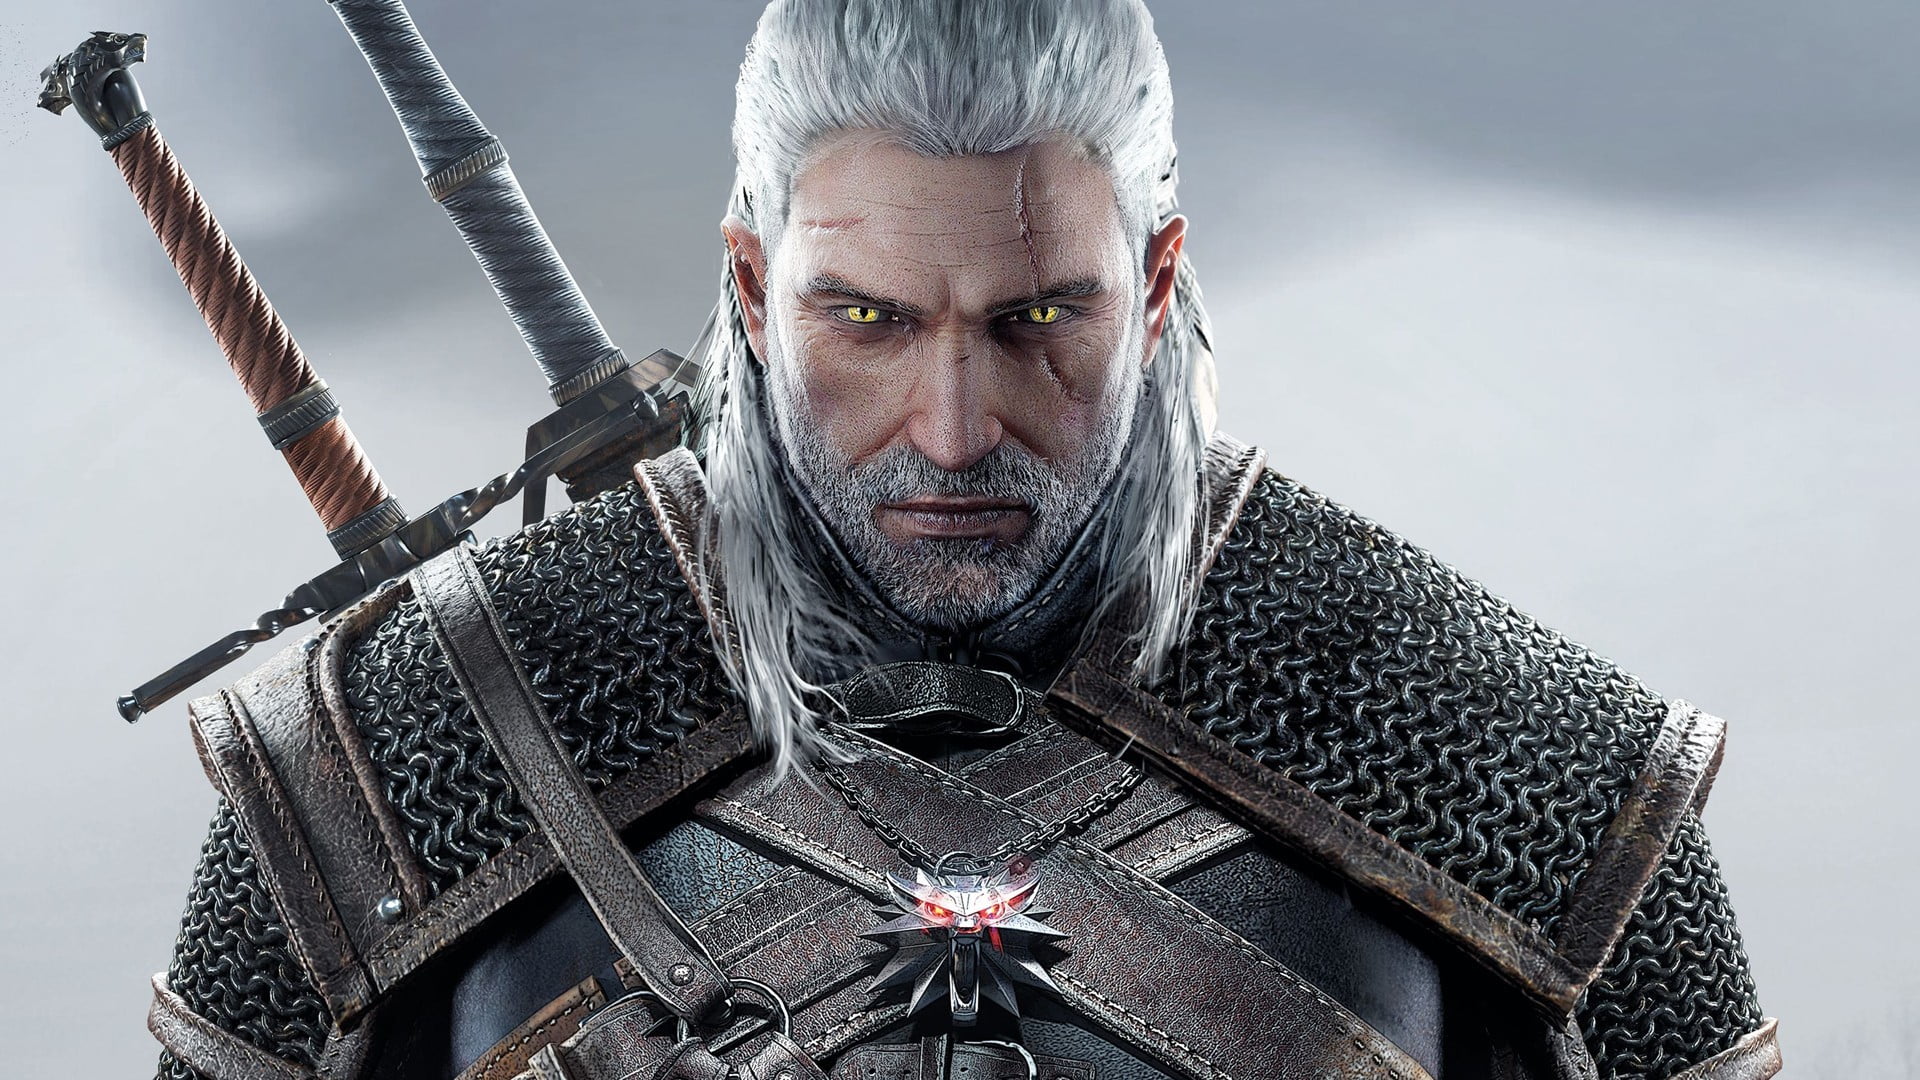 The Witcher digital wallpaper, The Witcher 3: Wild Hunt, video games